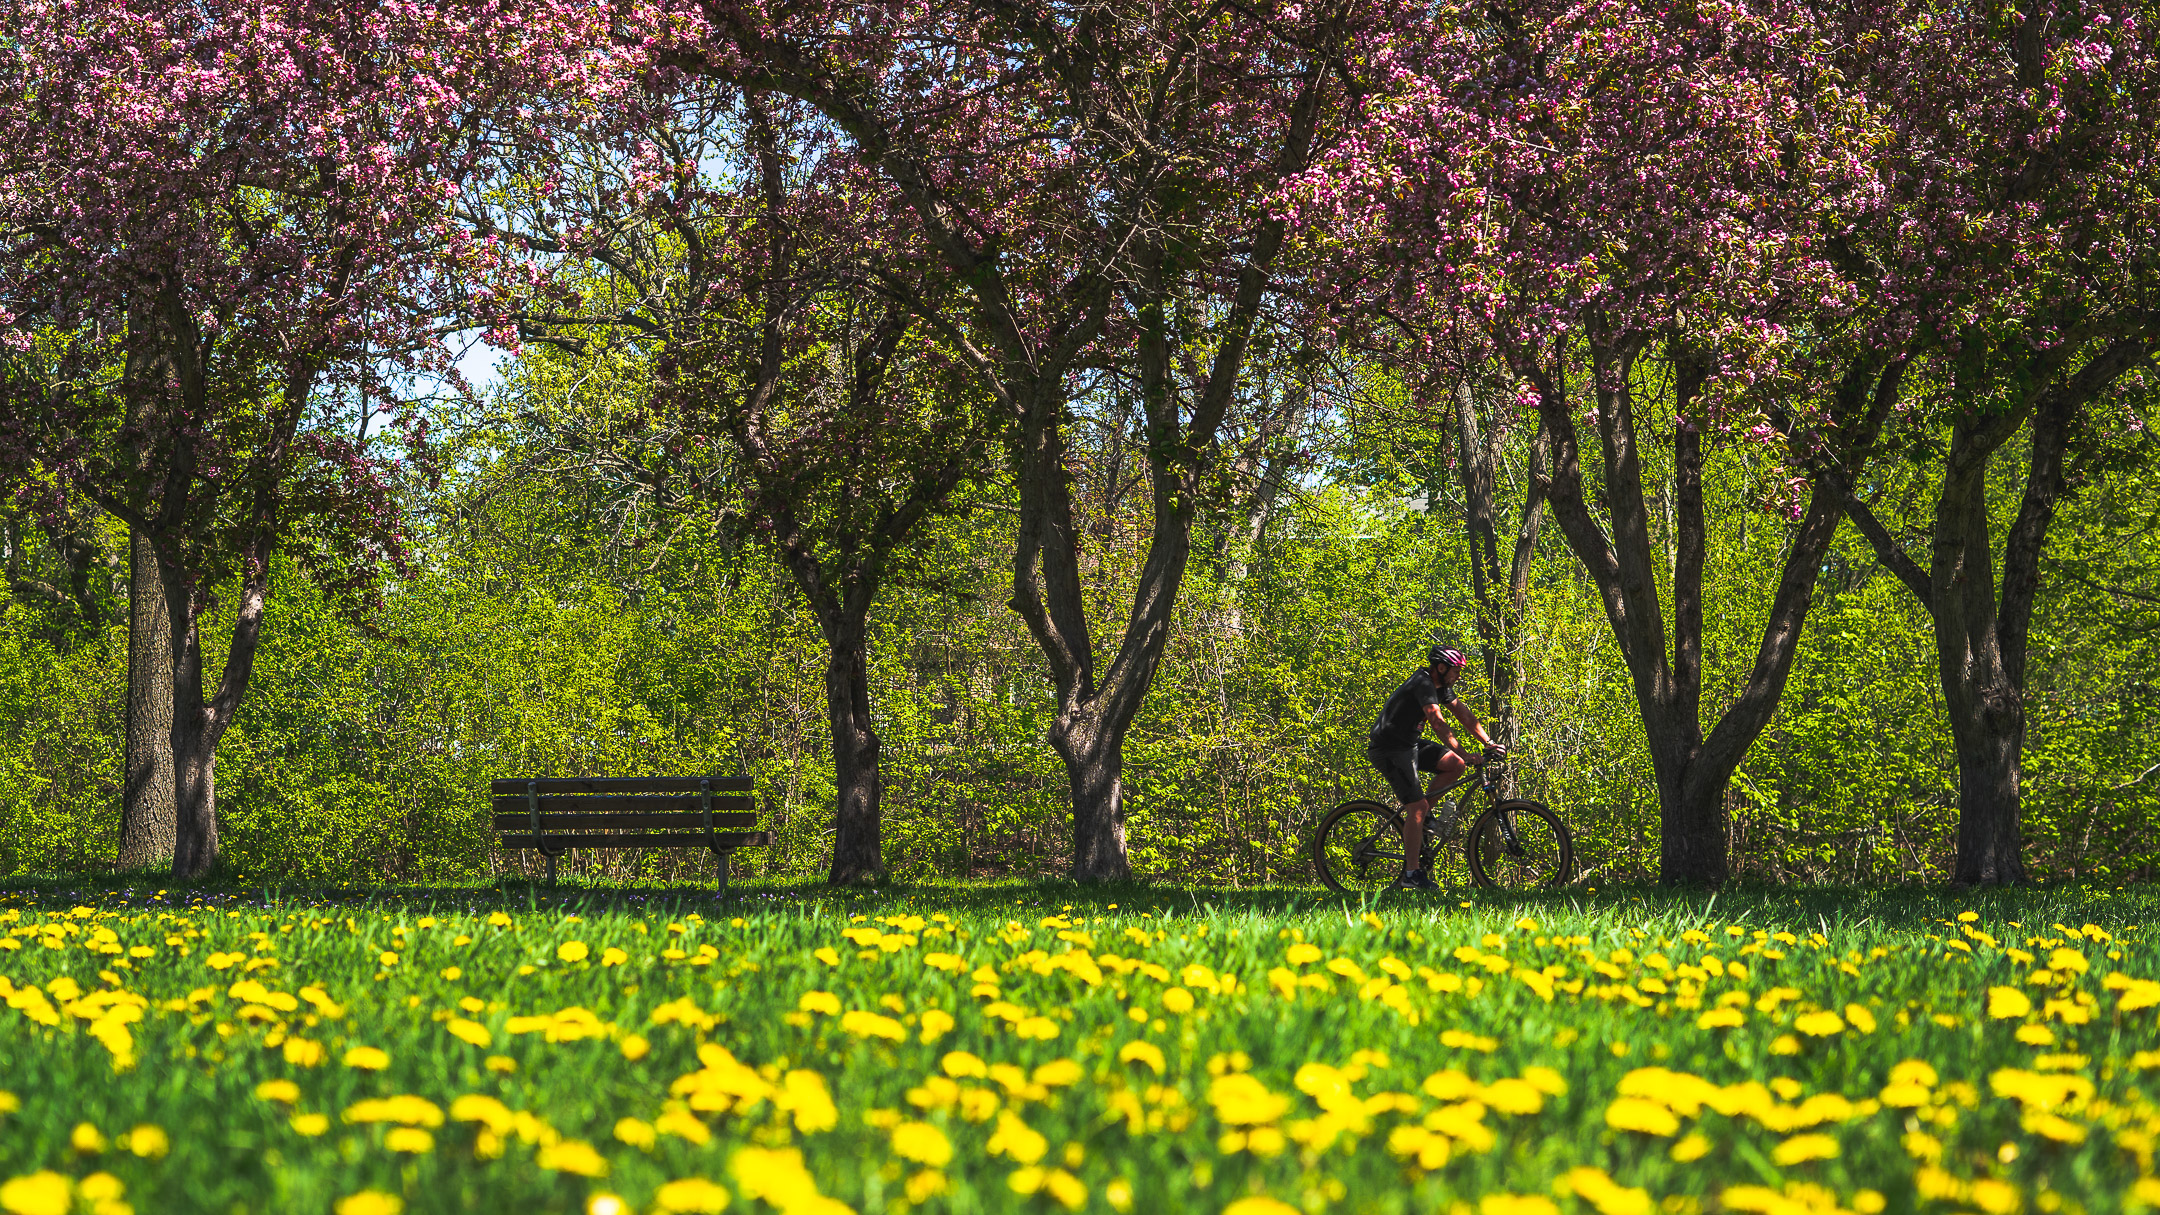 A man on a bike rides through a field of dandelions and flowering trees.